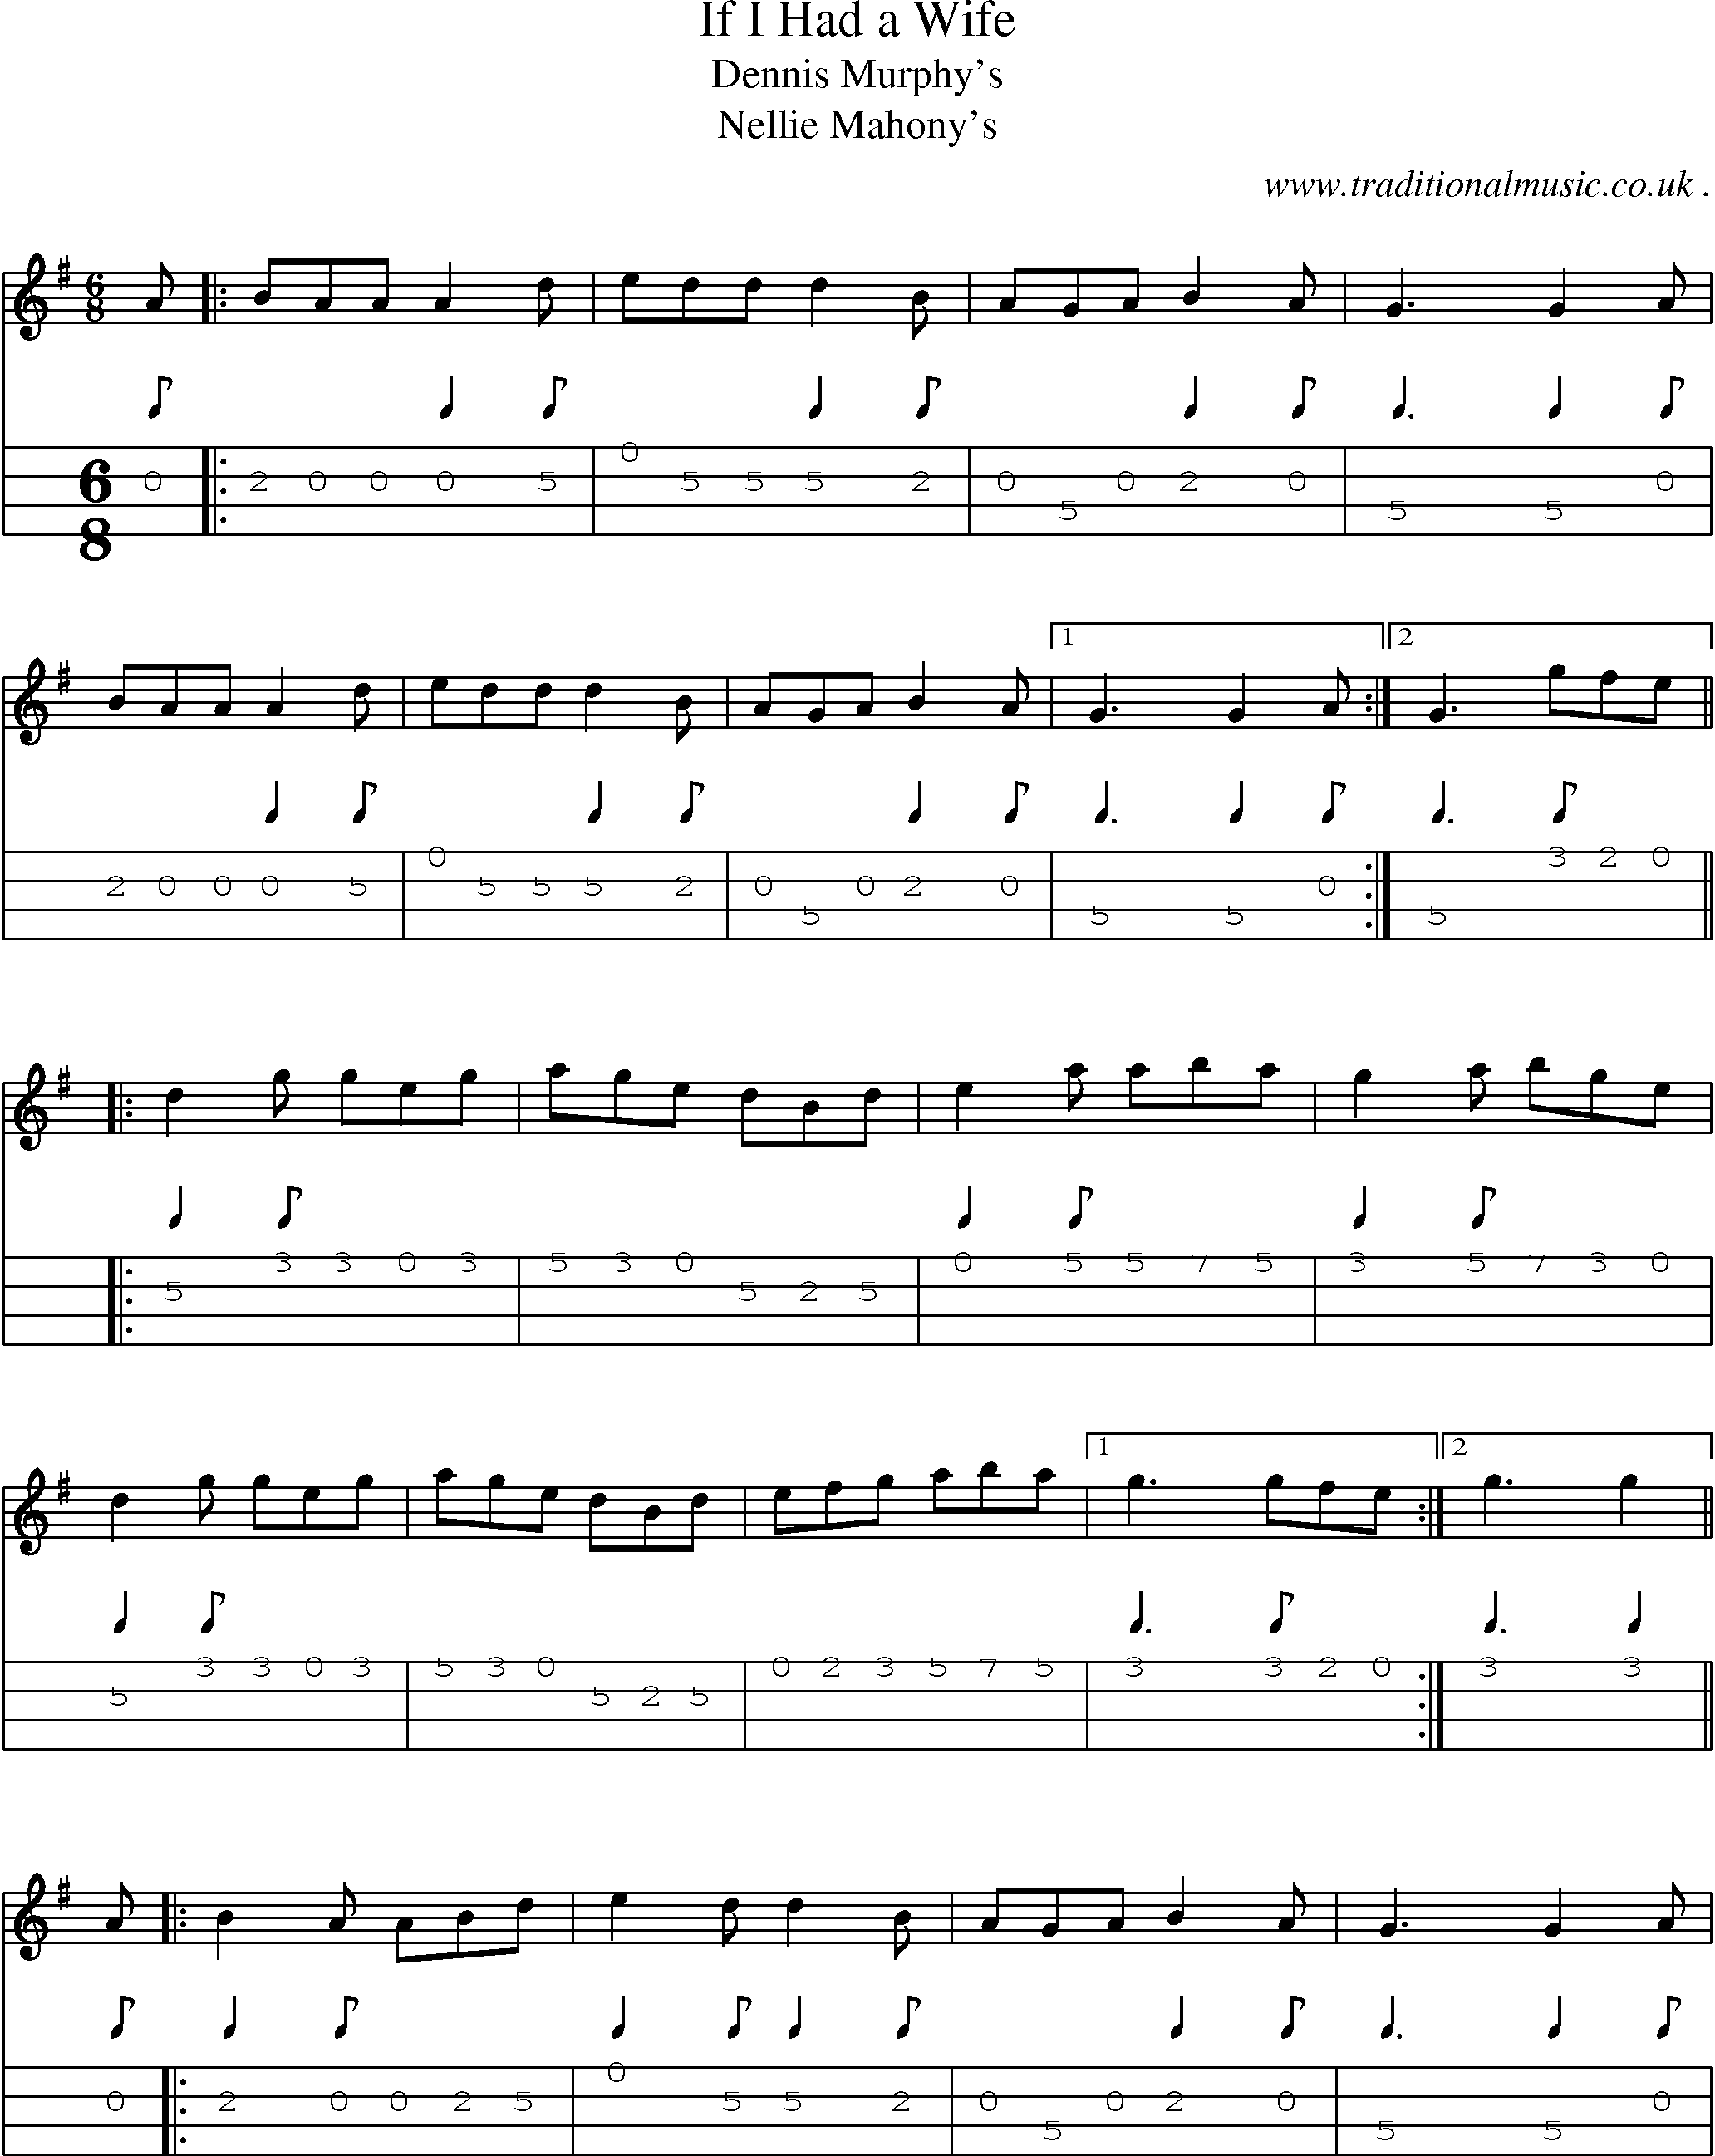 Sheet-Music and Mandolin Tabs for If I Had A Wife